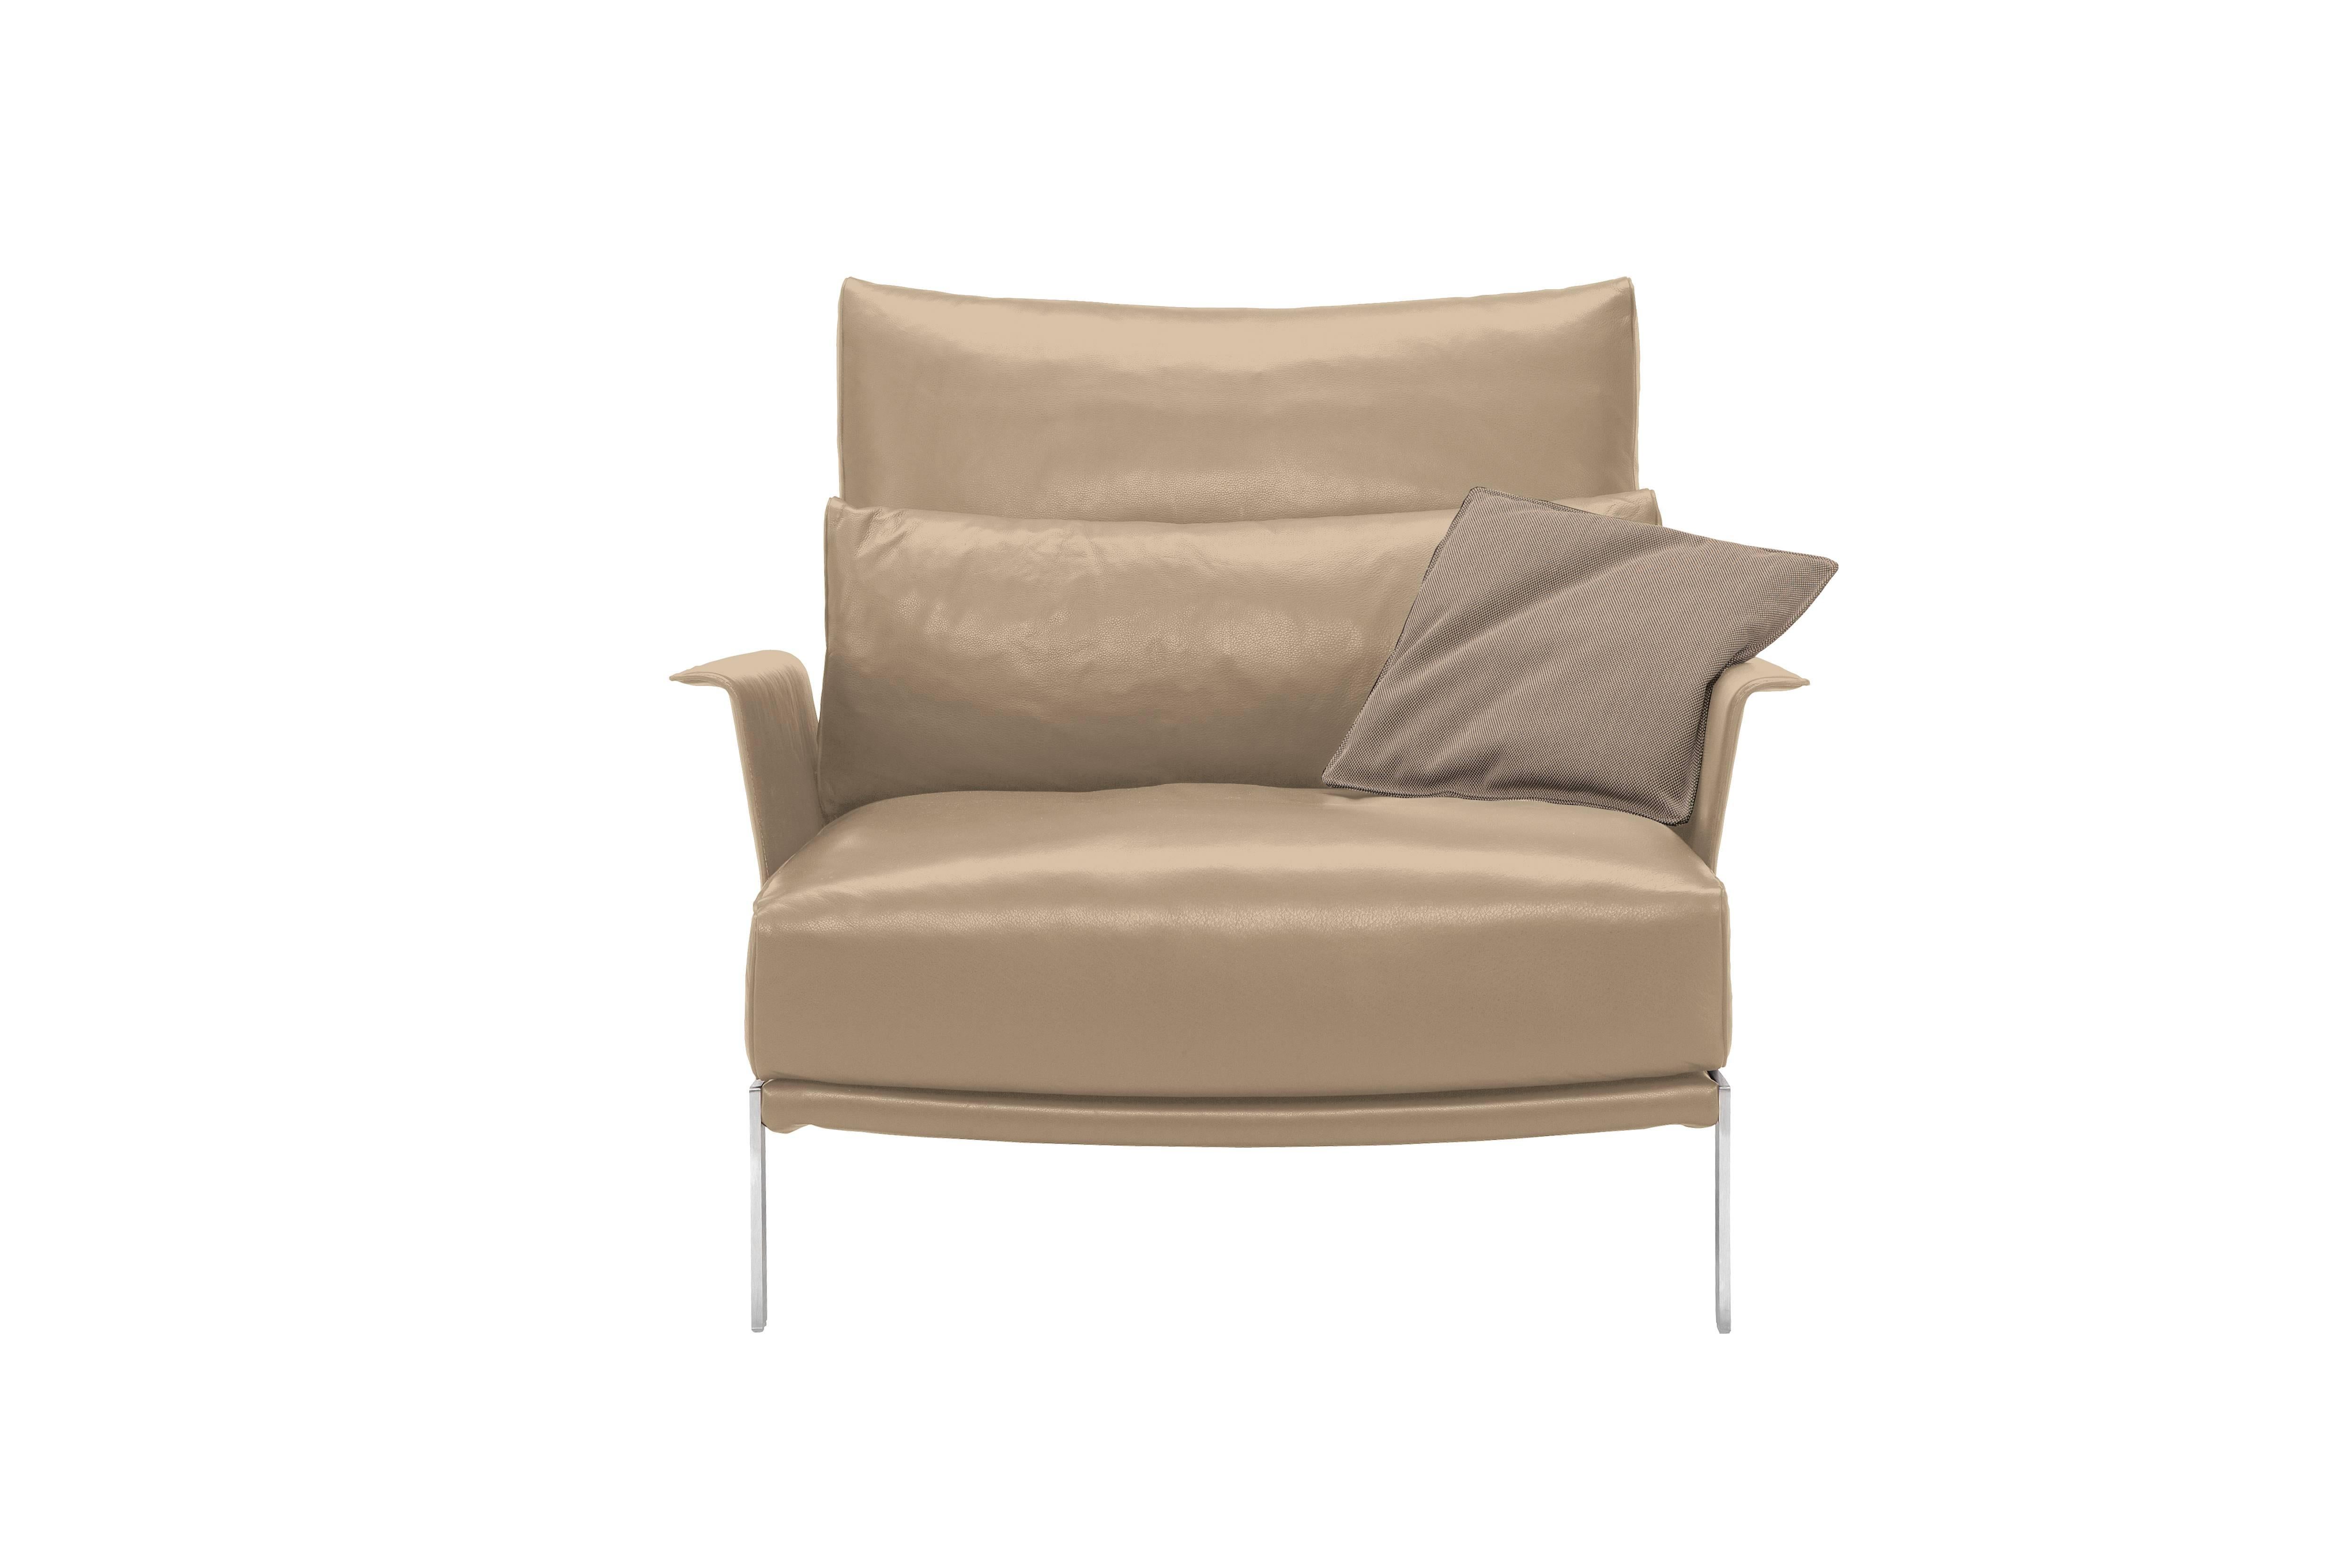 Modern Link Armchair in Pale Gray by Maurizio Marconato & Terry Zappa For Sale